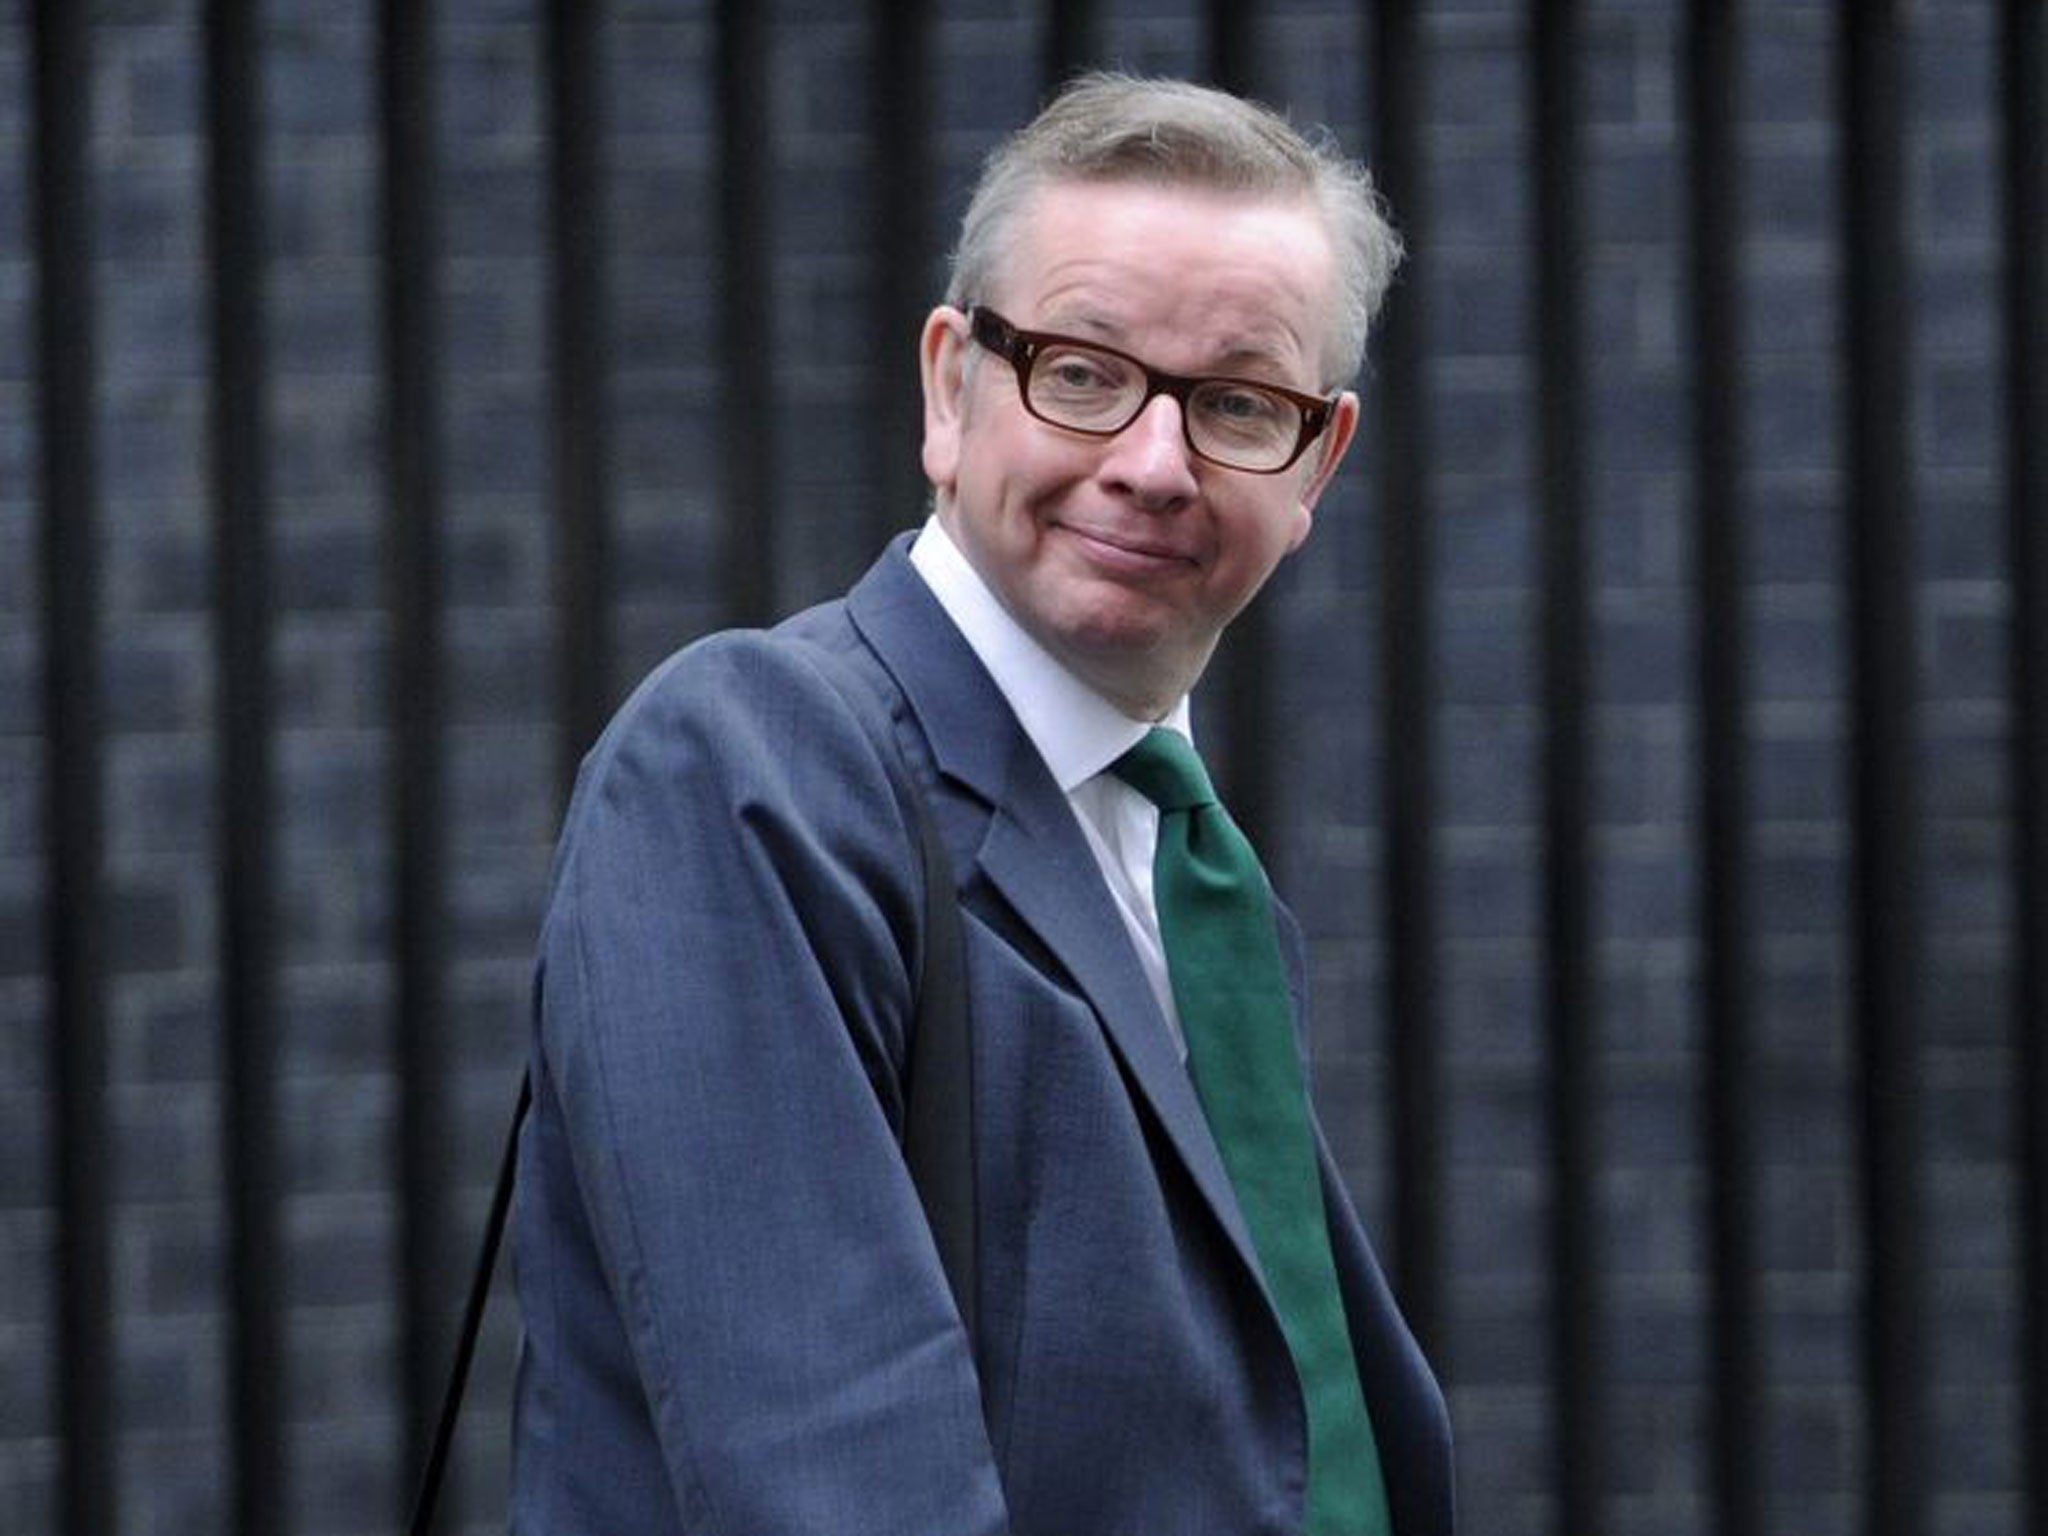 The NUT has accused Michael Gove of 'persistent refusals to address dispute over pay, pensions and conditions'